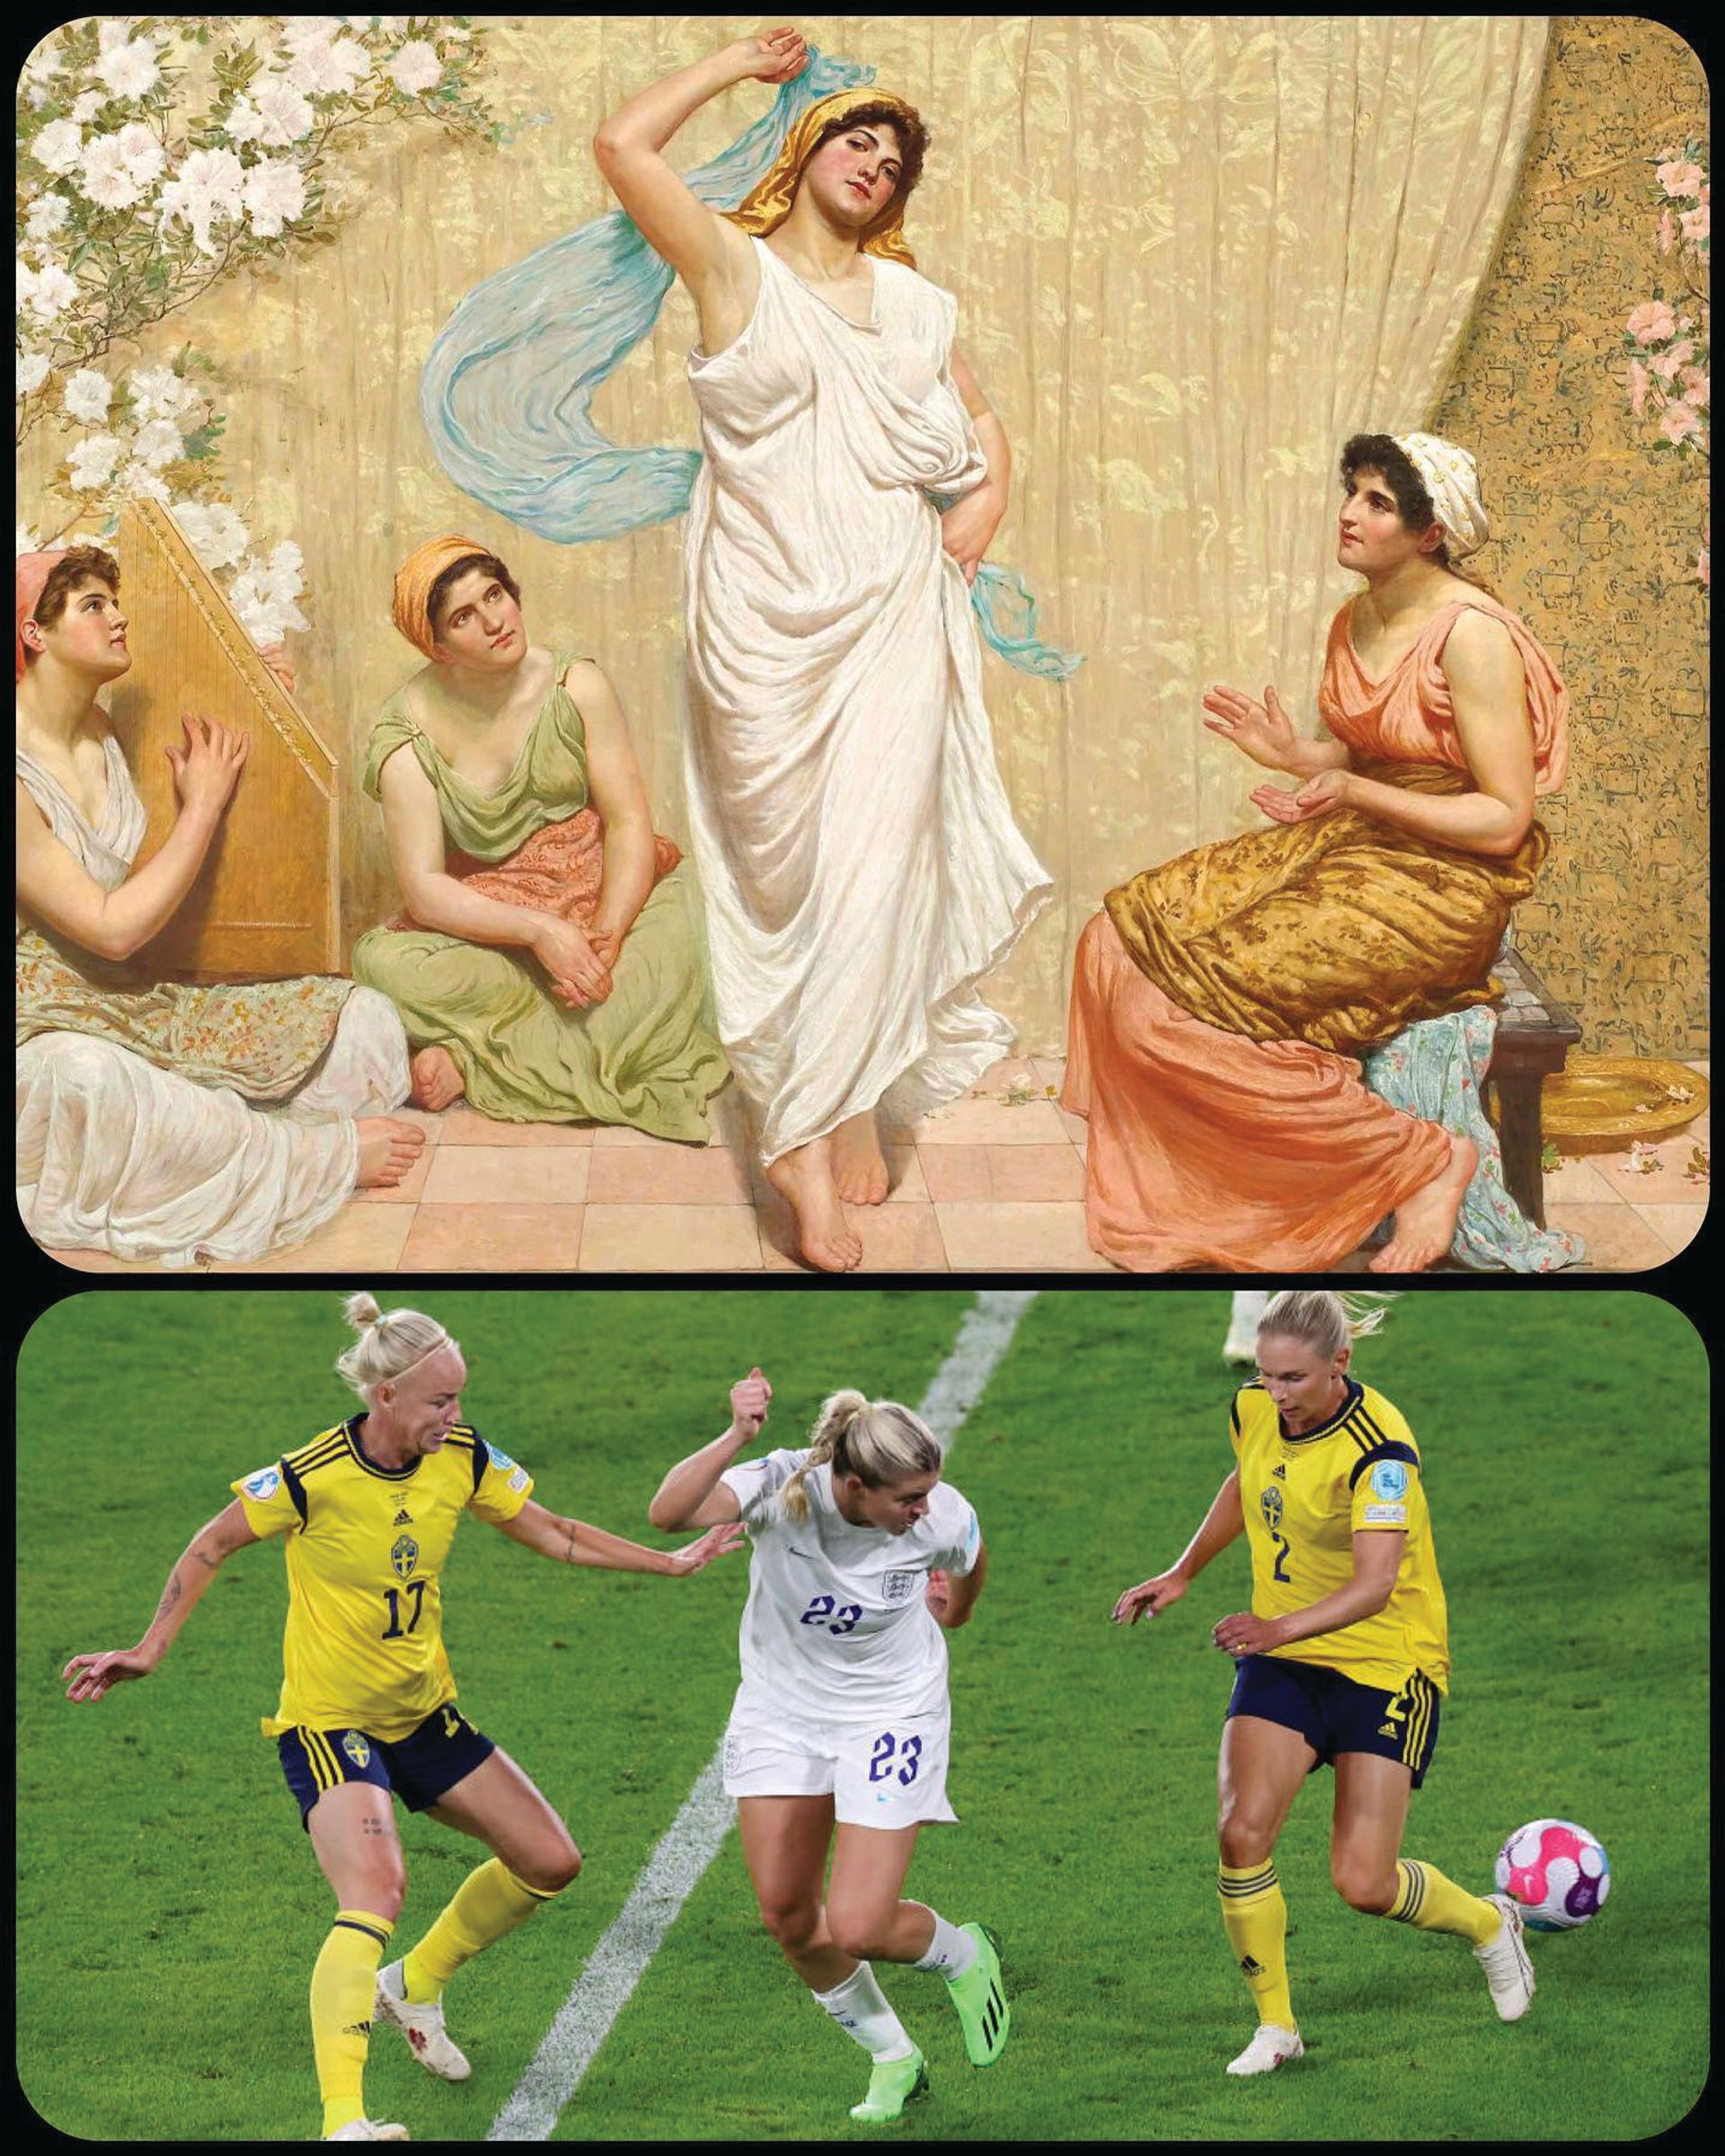 Striking a pose: for his Art But Make It Sports Instagram account, L.J. Rader paired Robert Fowler’s Dance of Salome (1885) with an image of the England football player Alessia Russo’s stunning backheeled goal against Sweden in the Women’s Euros semi-final earlier this year

Robert Fowler; Dance of Salome; 1885; Photo: © BarclaysWSL. credit: @artbutmakeitsports